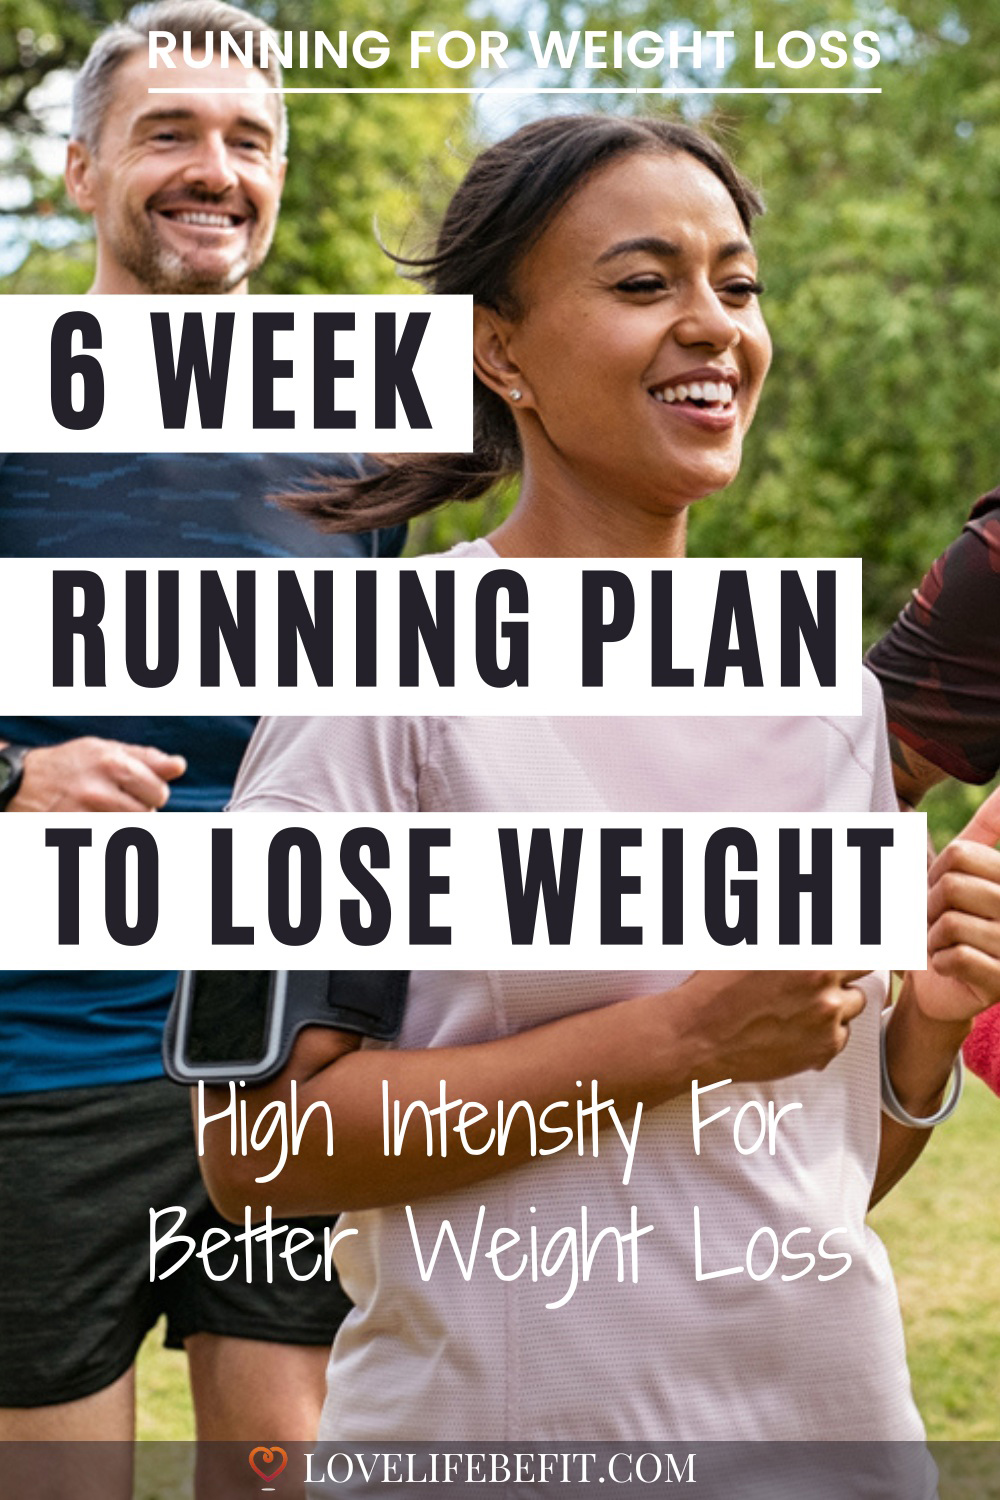 Running For Weight Loss Plans PINs 